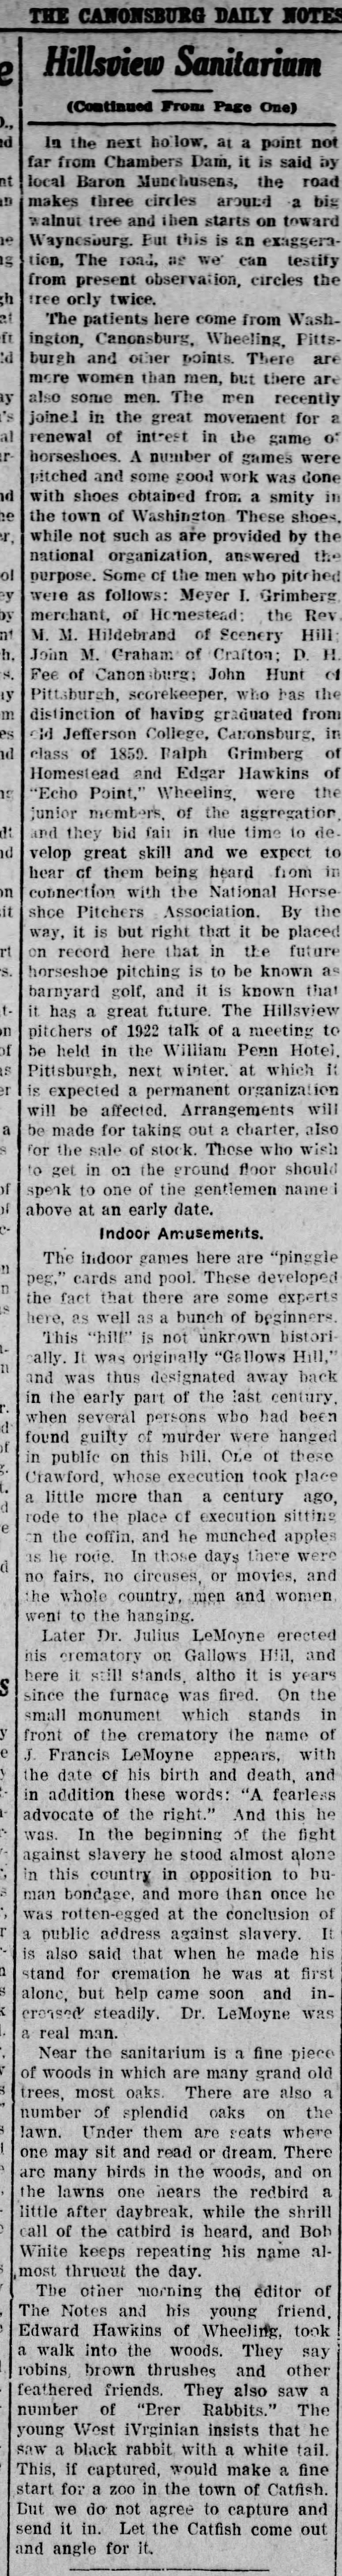 Hillsview Farms Sanitarium, The Daily Notes (Canonsburg, PA), 8 Aug 1922, page 3, Col. 4